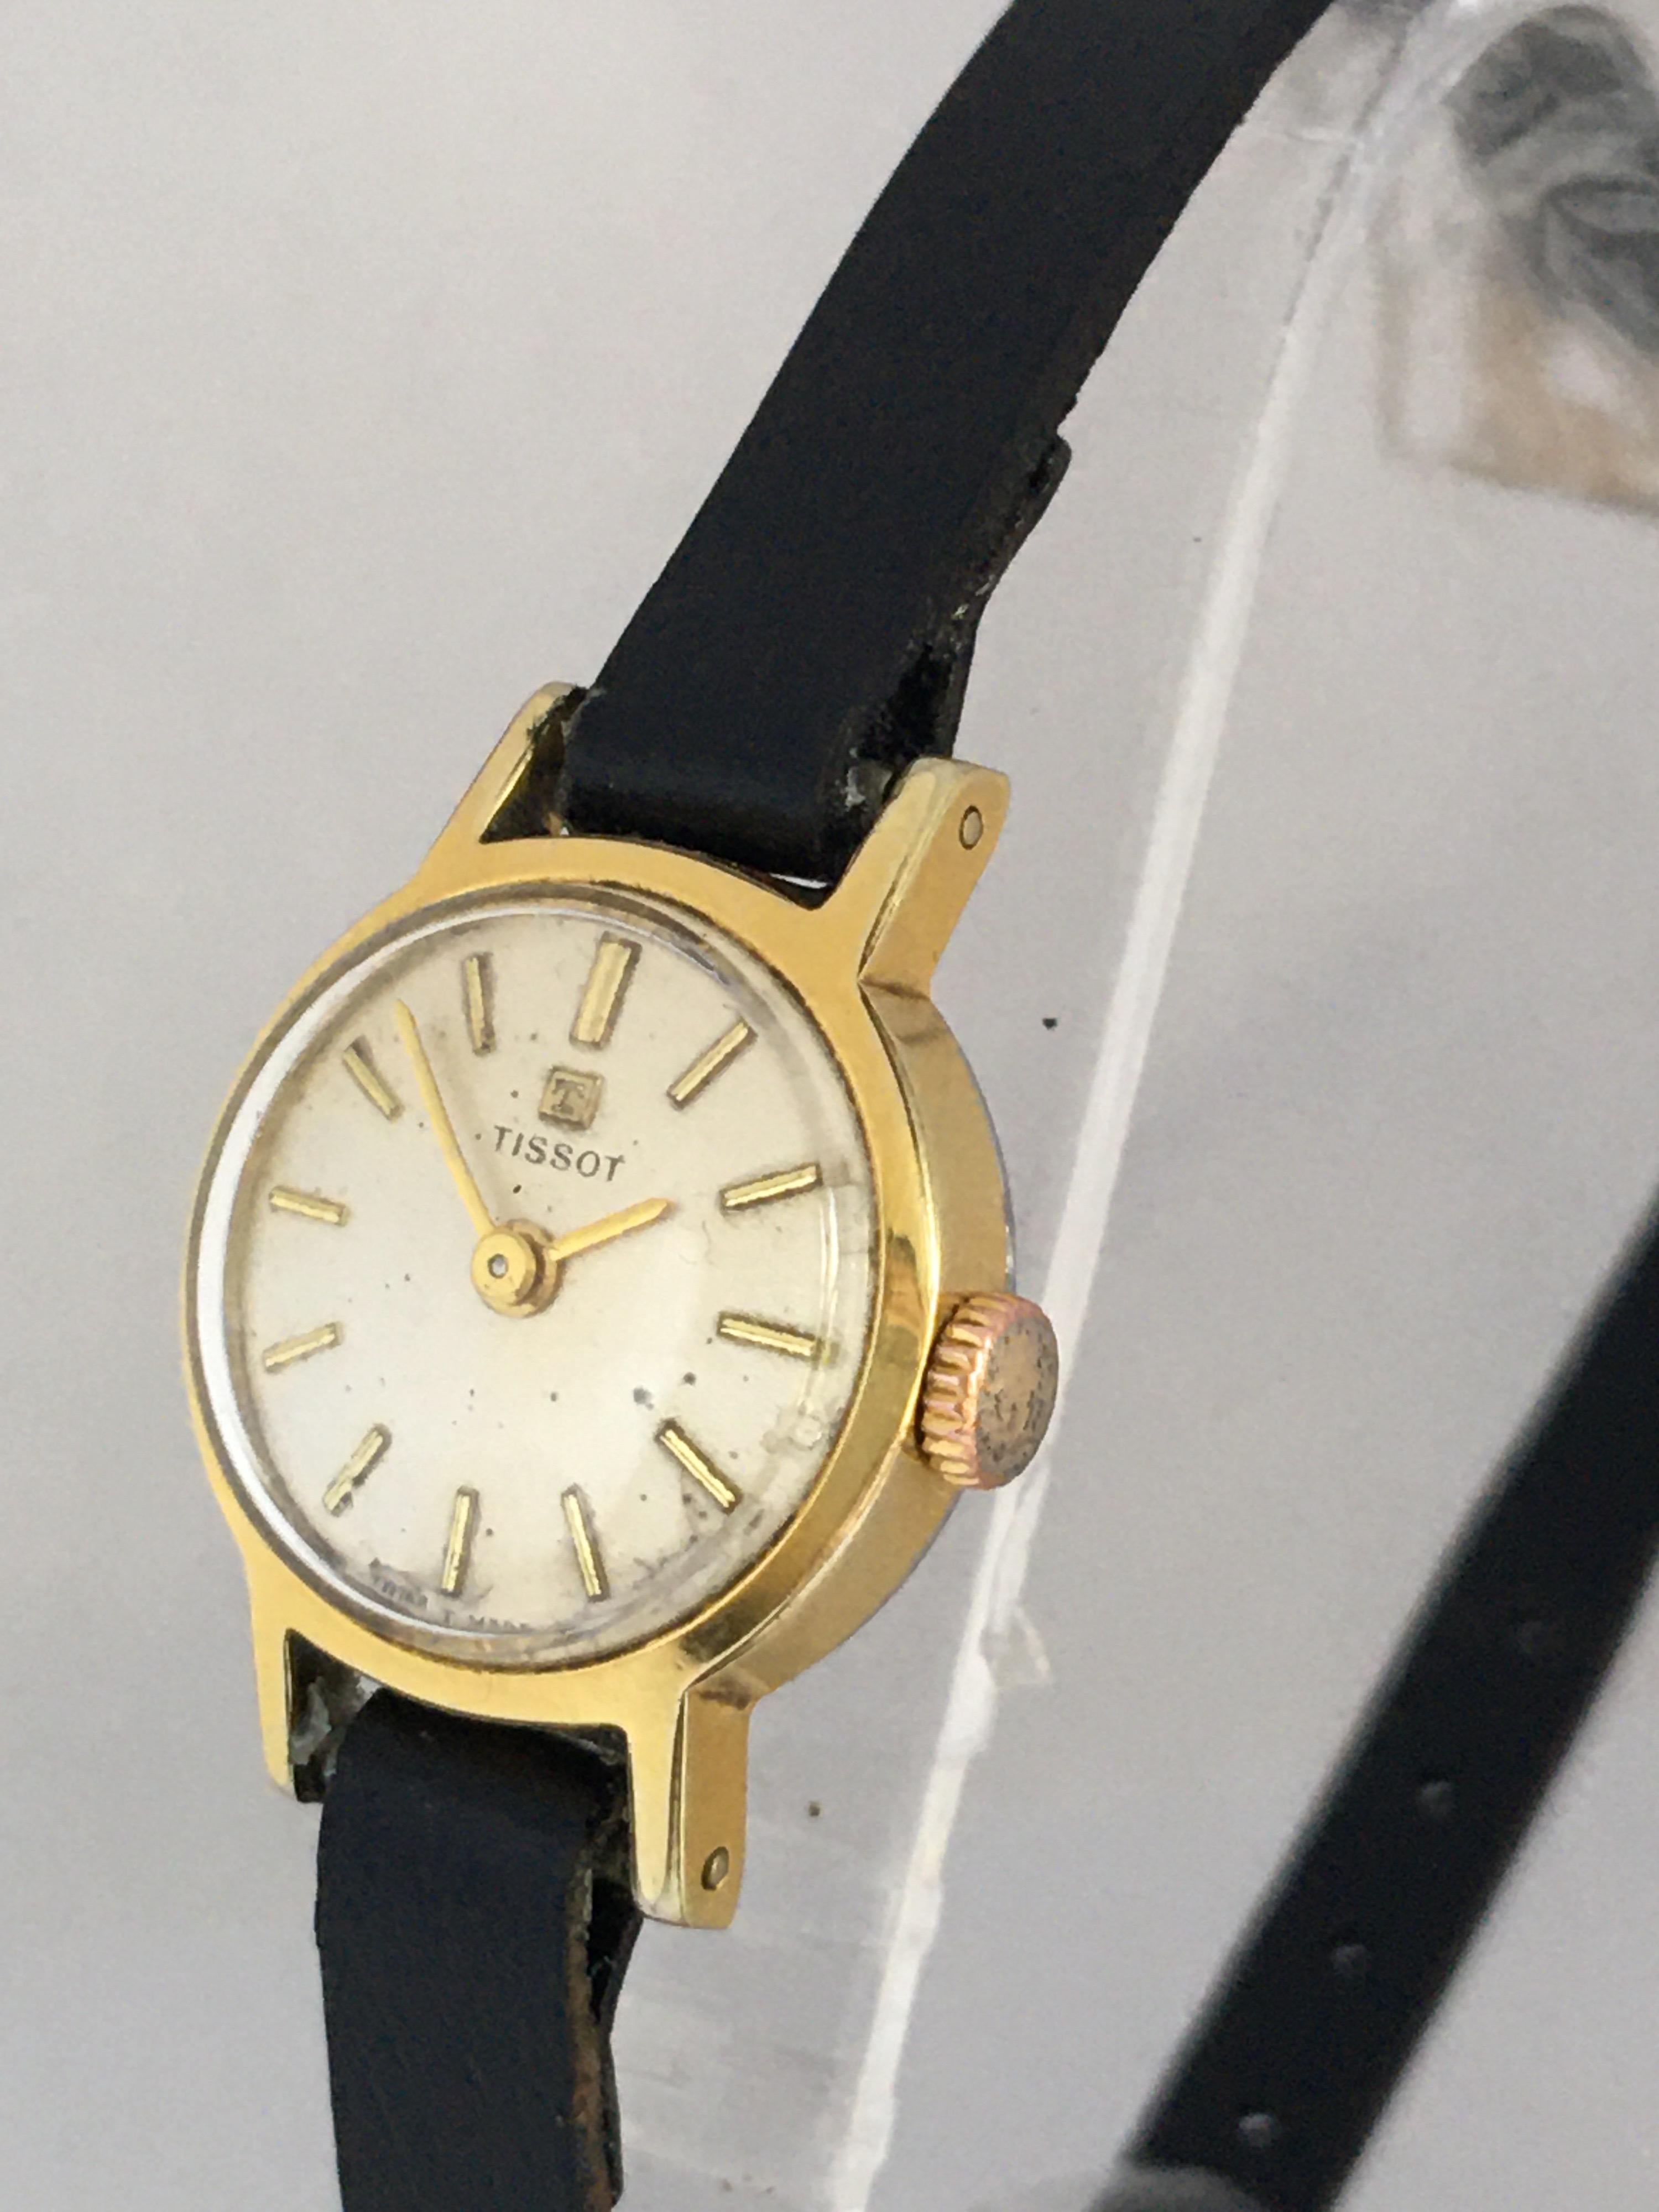 This beautiful pre-owned 17mm diameter vintage hand-winding ladies watch is in good working condition and it is ticking. Visible signs of ageing and wear with small and light on the glass and on the watch case as shown. The dial has aged as shown.